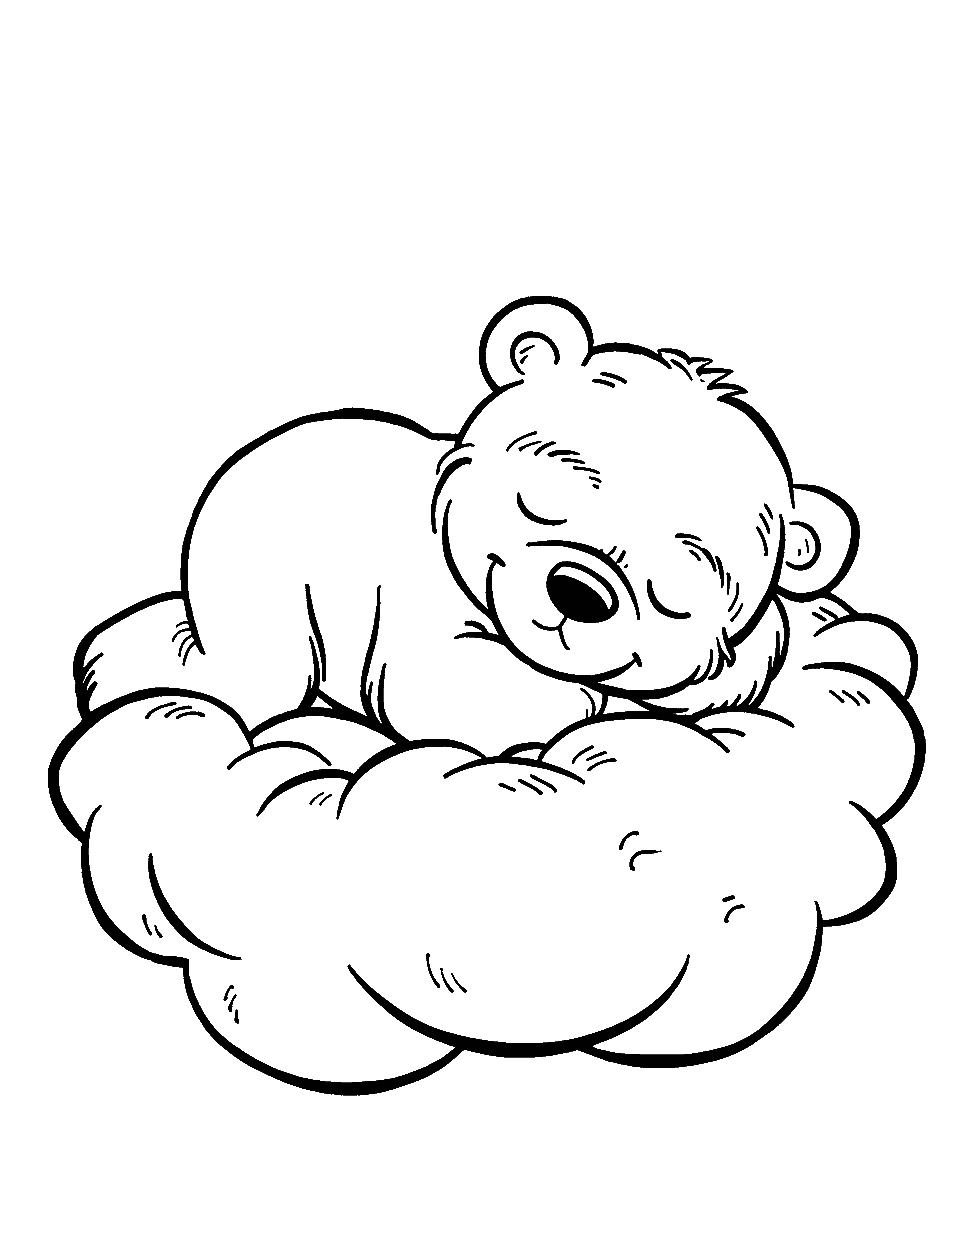 Baby Teddy Bear Nap Time Coloring Page - A baby teddy bear sleeping peacefully on a cloud.